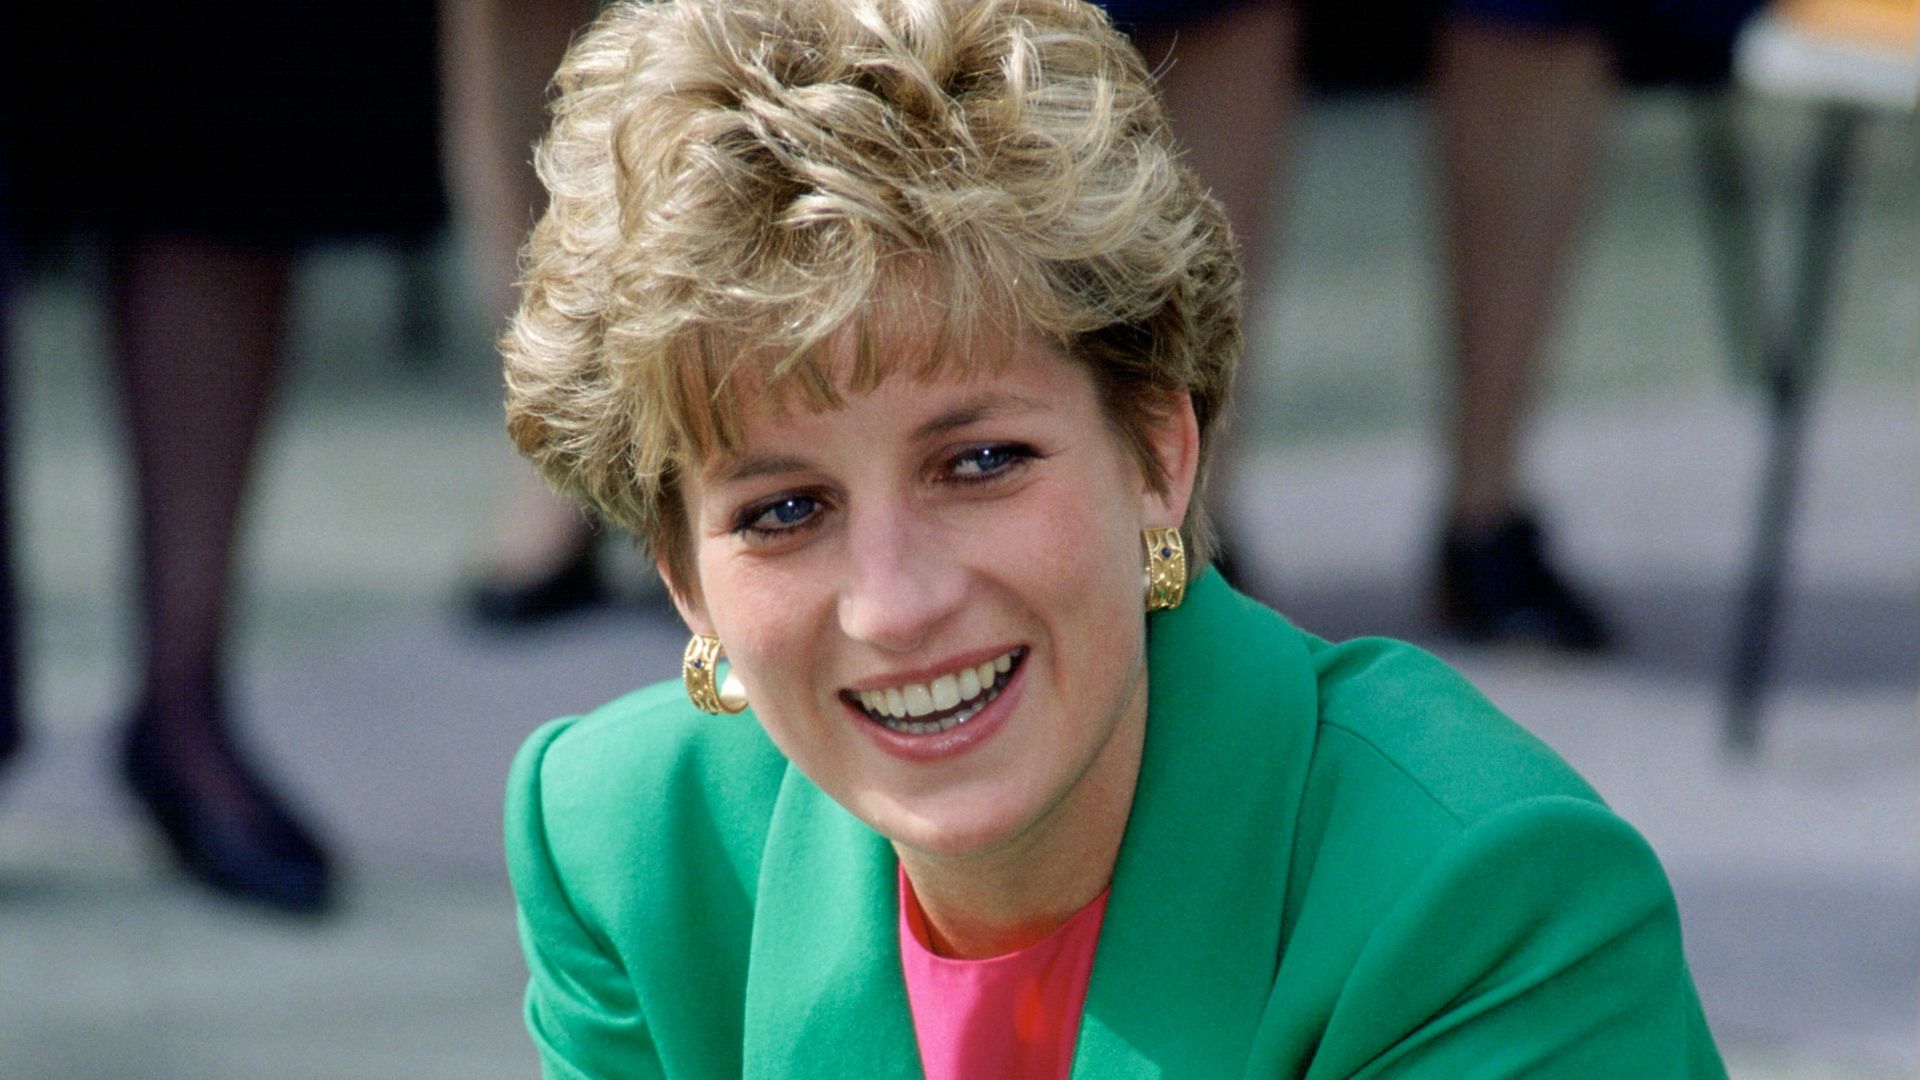 <p>                     When Diana and Charles divorced in 1996, her role as a royal changed, given that she was<em> technically</em> no longer an official working member of the family.                   </p>                                      <p>                     As such, in July 1996, she quit her roles as patron or president to over 100 organisations, including her connections to military units. In total, she slimmed down her links with her chosen causes to just six; she remained as patron of Centrepoint (of which her son William is now patron), the National Aids Trust, Great Ormond Street, the English National Ballet, Leprosy Mission, and the Royal Marsden Hospital, until her death in 1997.                   </p>                                      <p>                     In a letter written to the chairman of the Royal New Zealand Foundation for The Blind and published by <em>The Telegraph</em>, Diana explained, "As I seek to re-organise my life it will not be possible for me to provide you with the right level of commitment and I feel that there may be someone else better suited to support you in all that you do."                   </p>